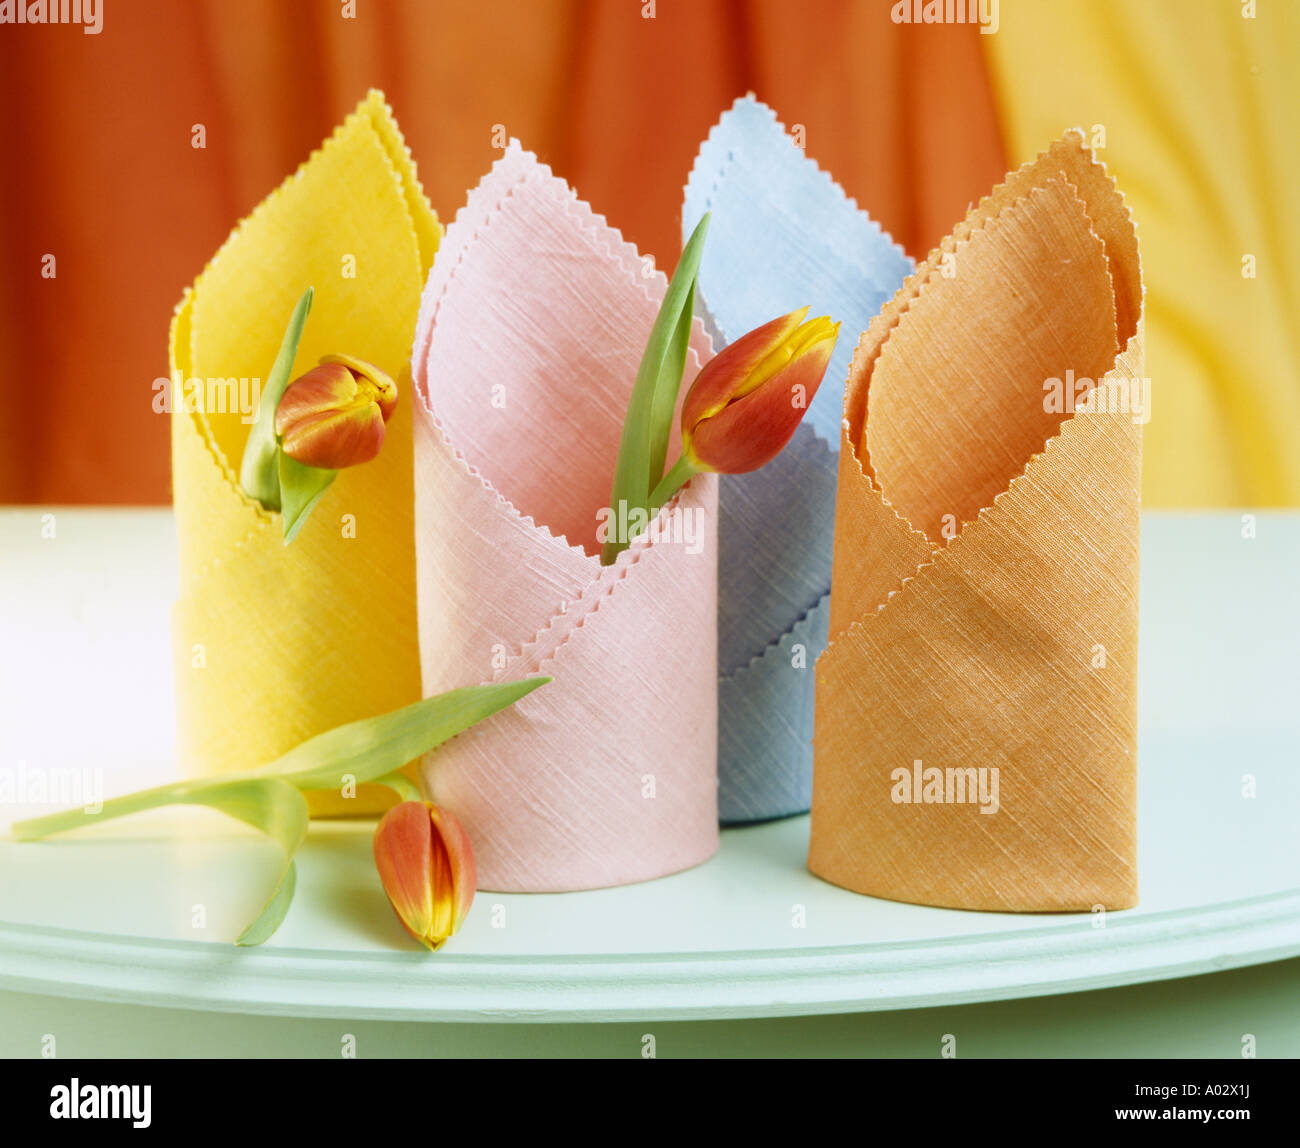 Close-up of orange pink and yellow table napkins Stock Photo